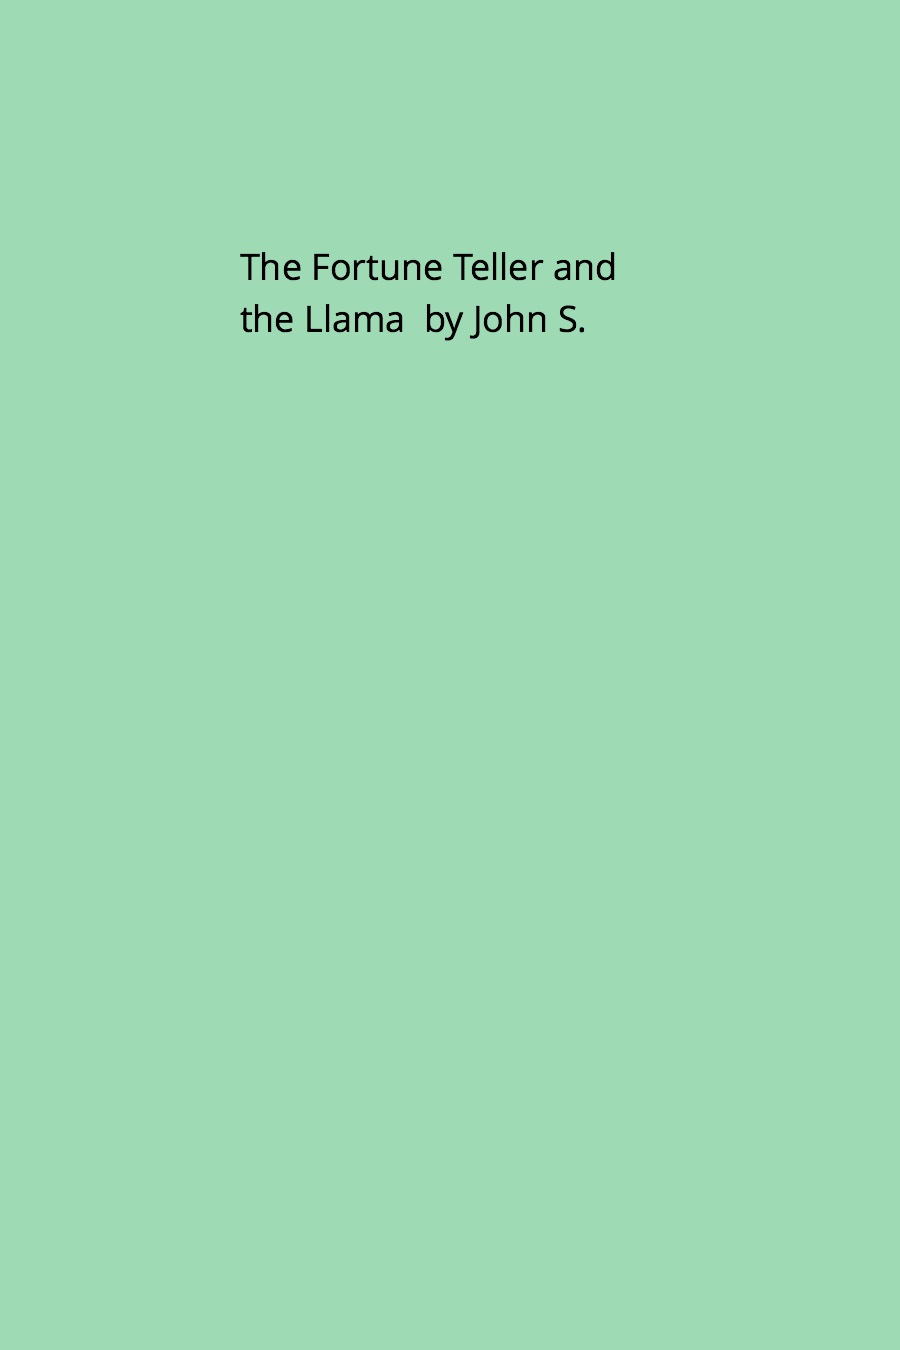 The Fortune Teller and the Llama by John S